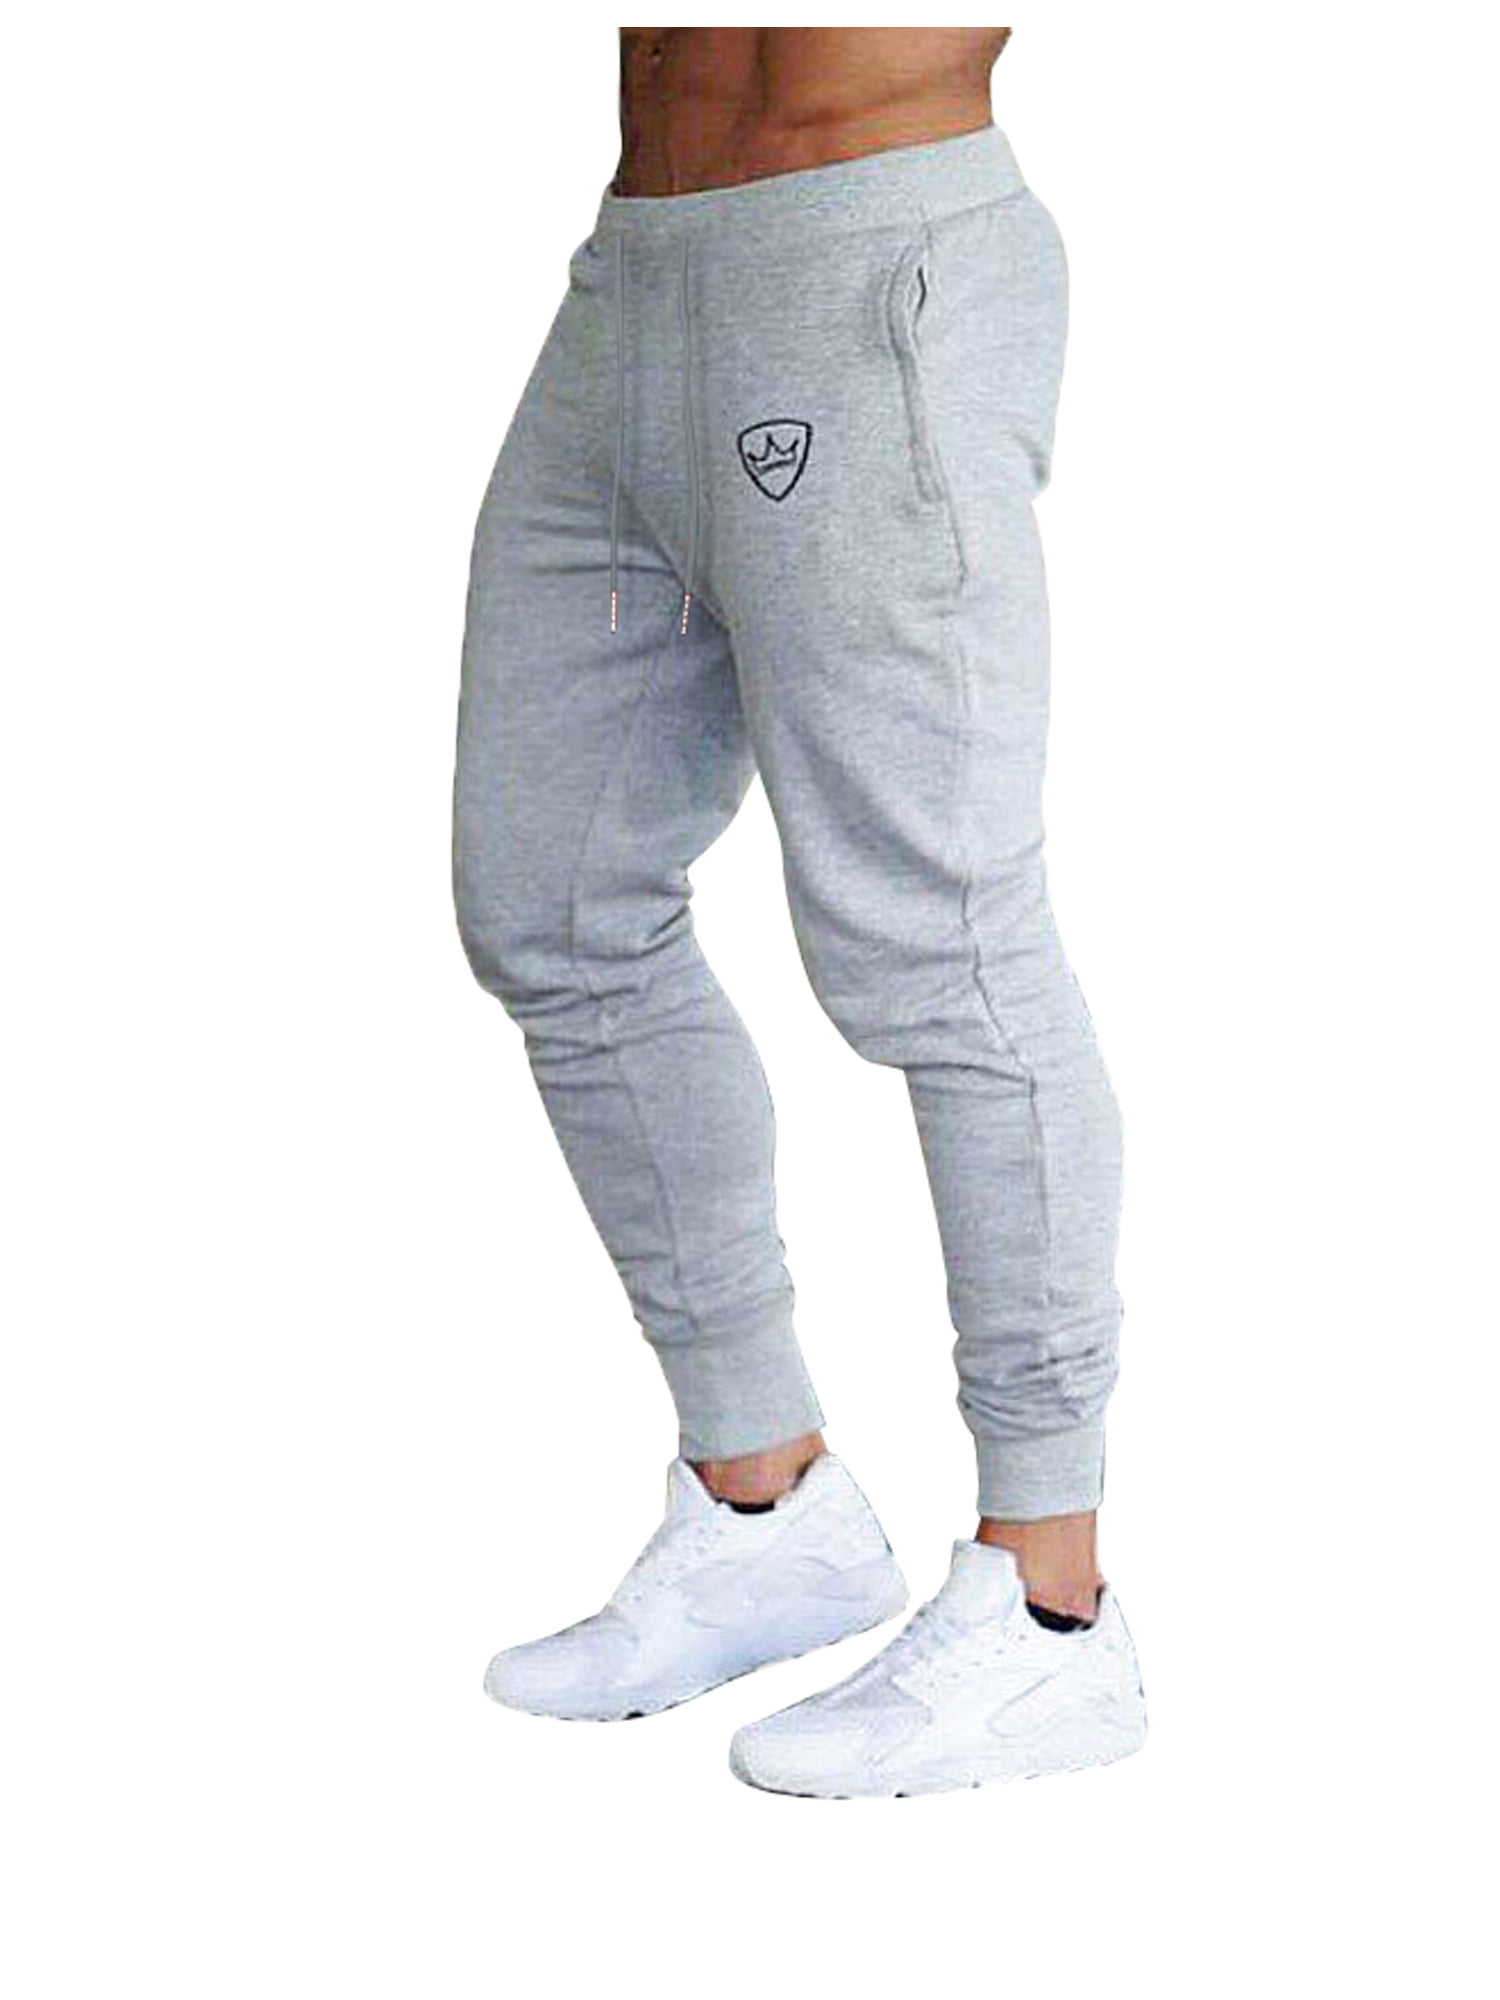 Details about   Mens Complete Tracksuit Joggers Hoody Cotton Slim Fit Gym Sports Red White Black 